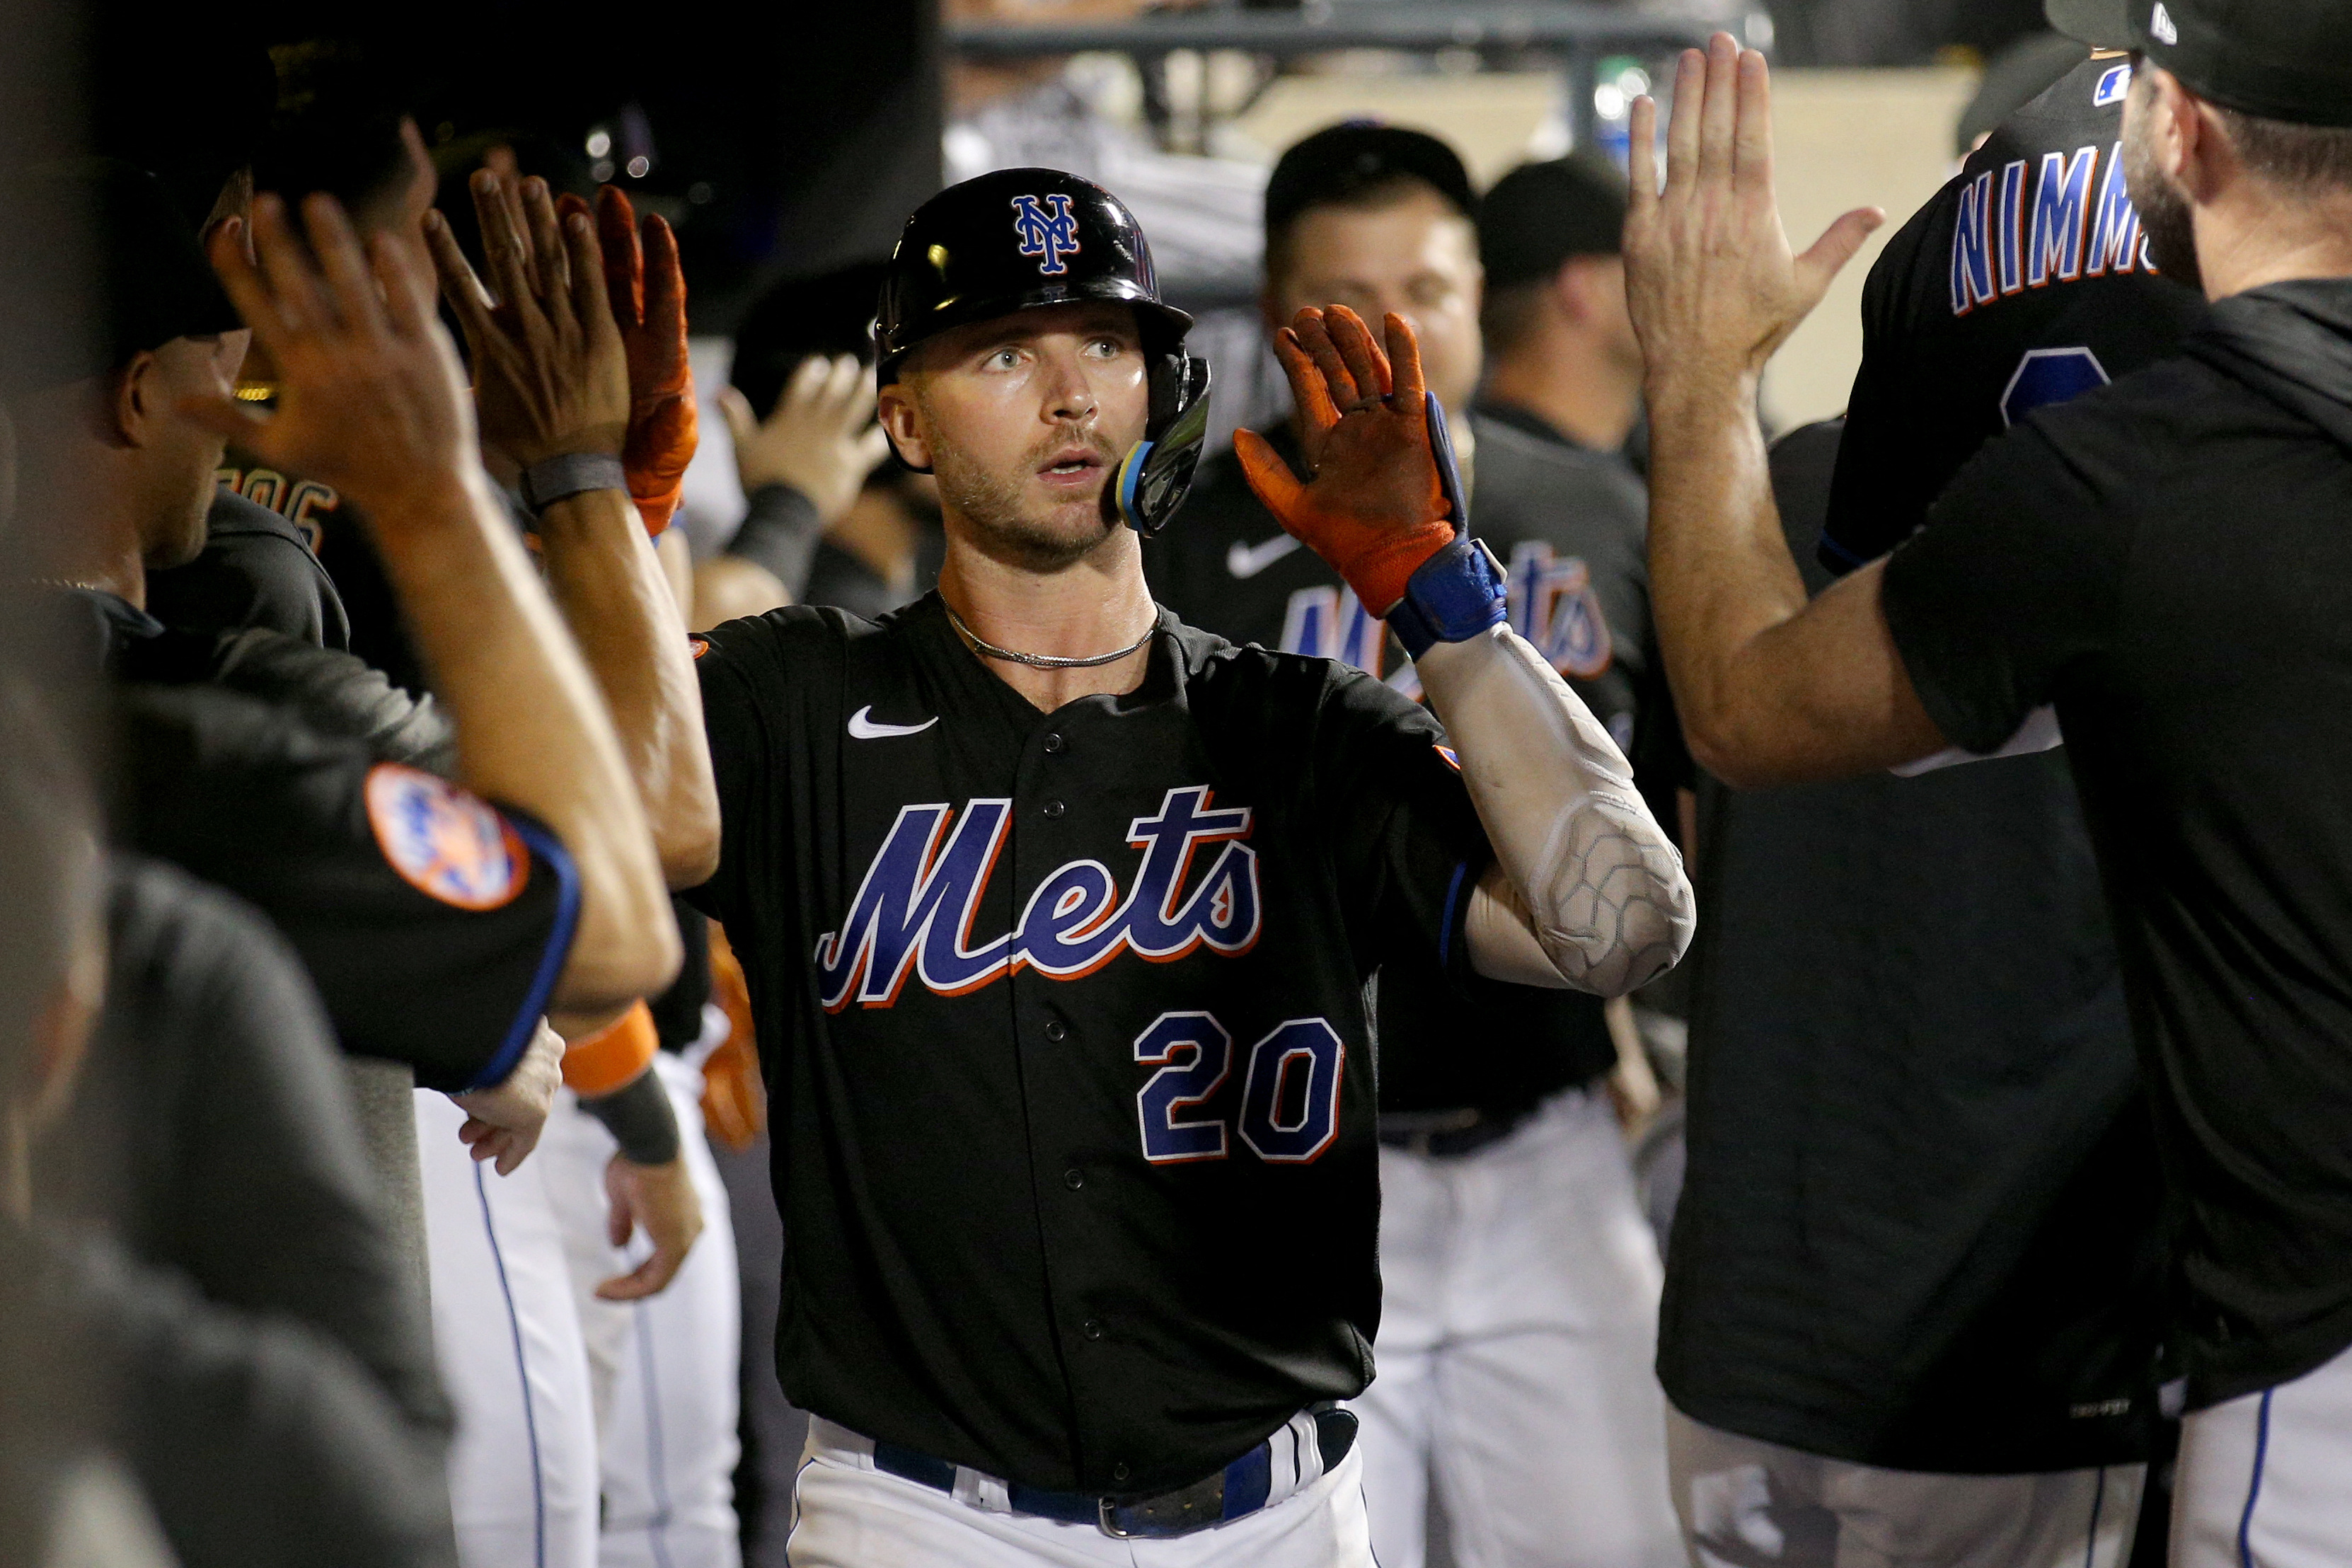 Red-hot Pete Alonso blasts 2 homers as Mets cruise past Nationals